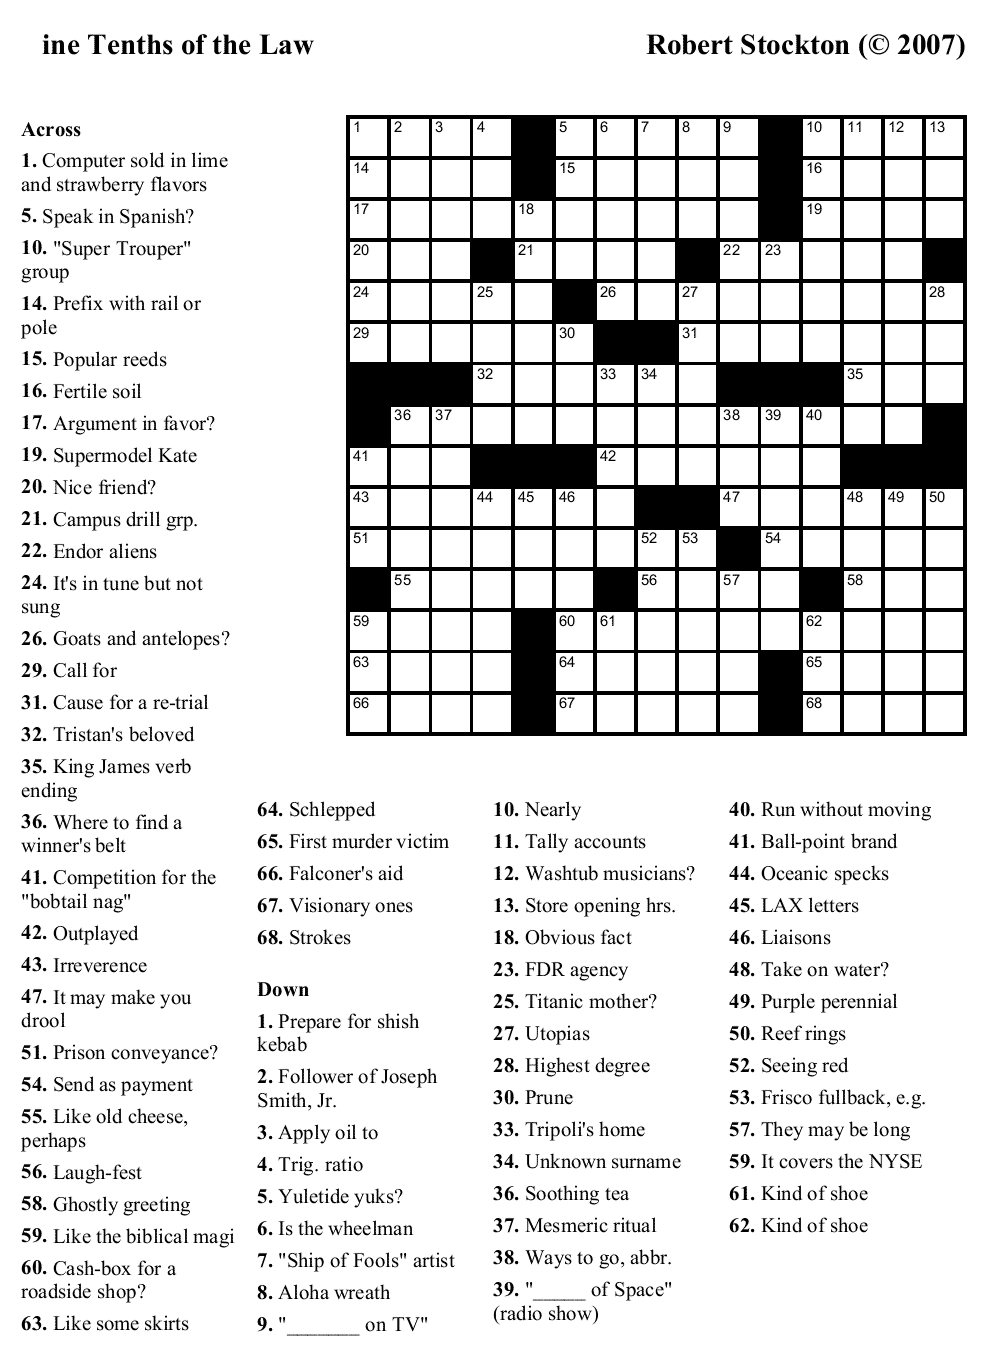 Crossword Puzzles Printable - Yahoo Image Search Results | Crossword - English Language Crossword Puzzles Printable